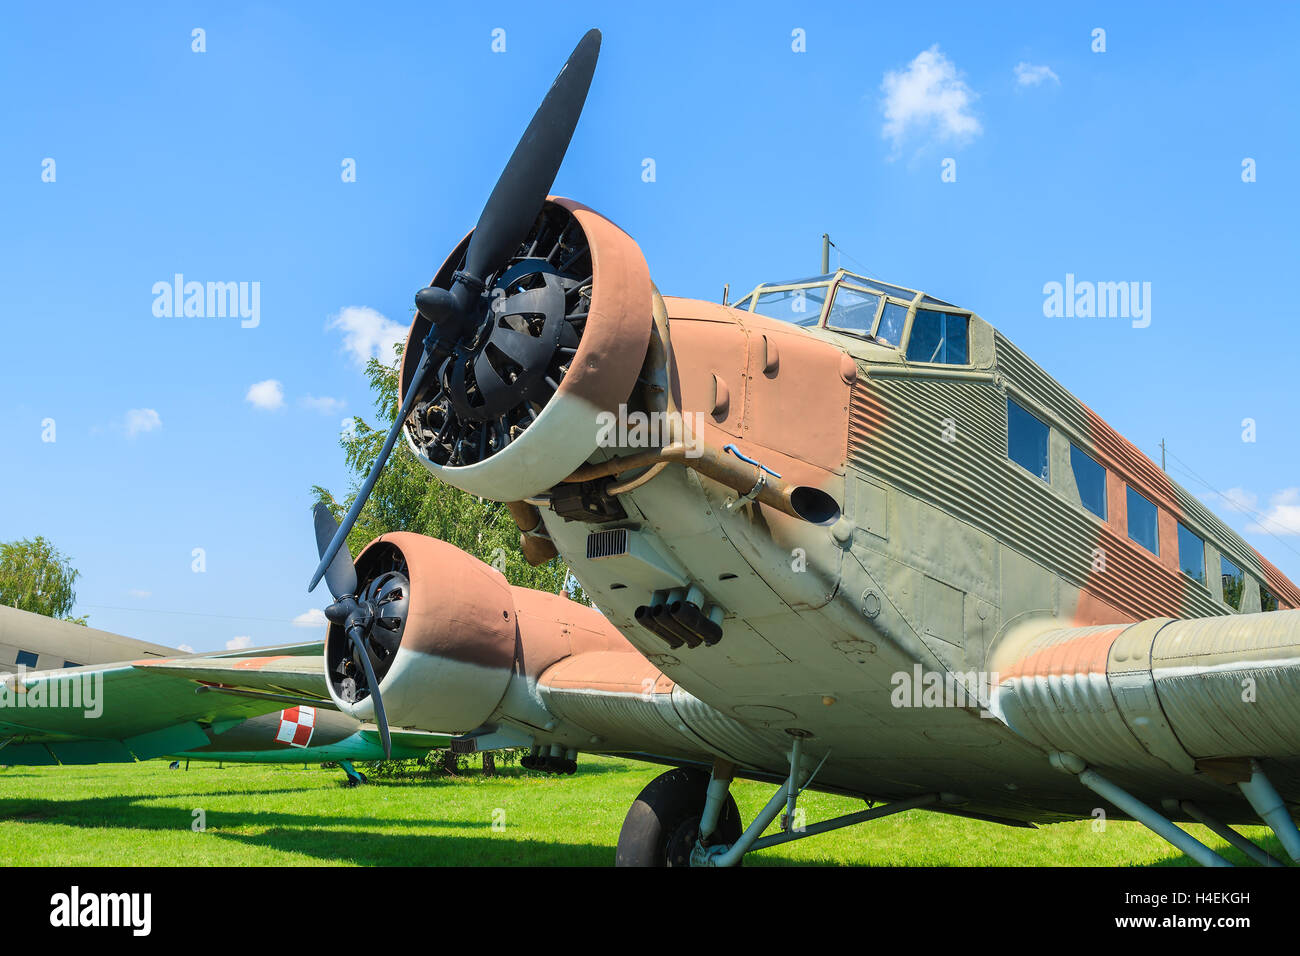 KRAKOW MUSEUM OF AVIATION, POLAND - JUL 27, 2014: old bomber aircraft on exhibition in outdoor museum of aviation history in Krakow, Poland. In summer often airshows take place here. Stock Photo